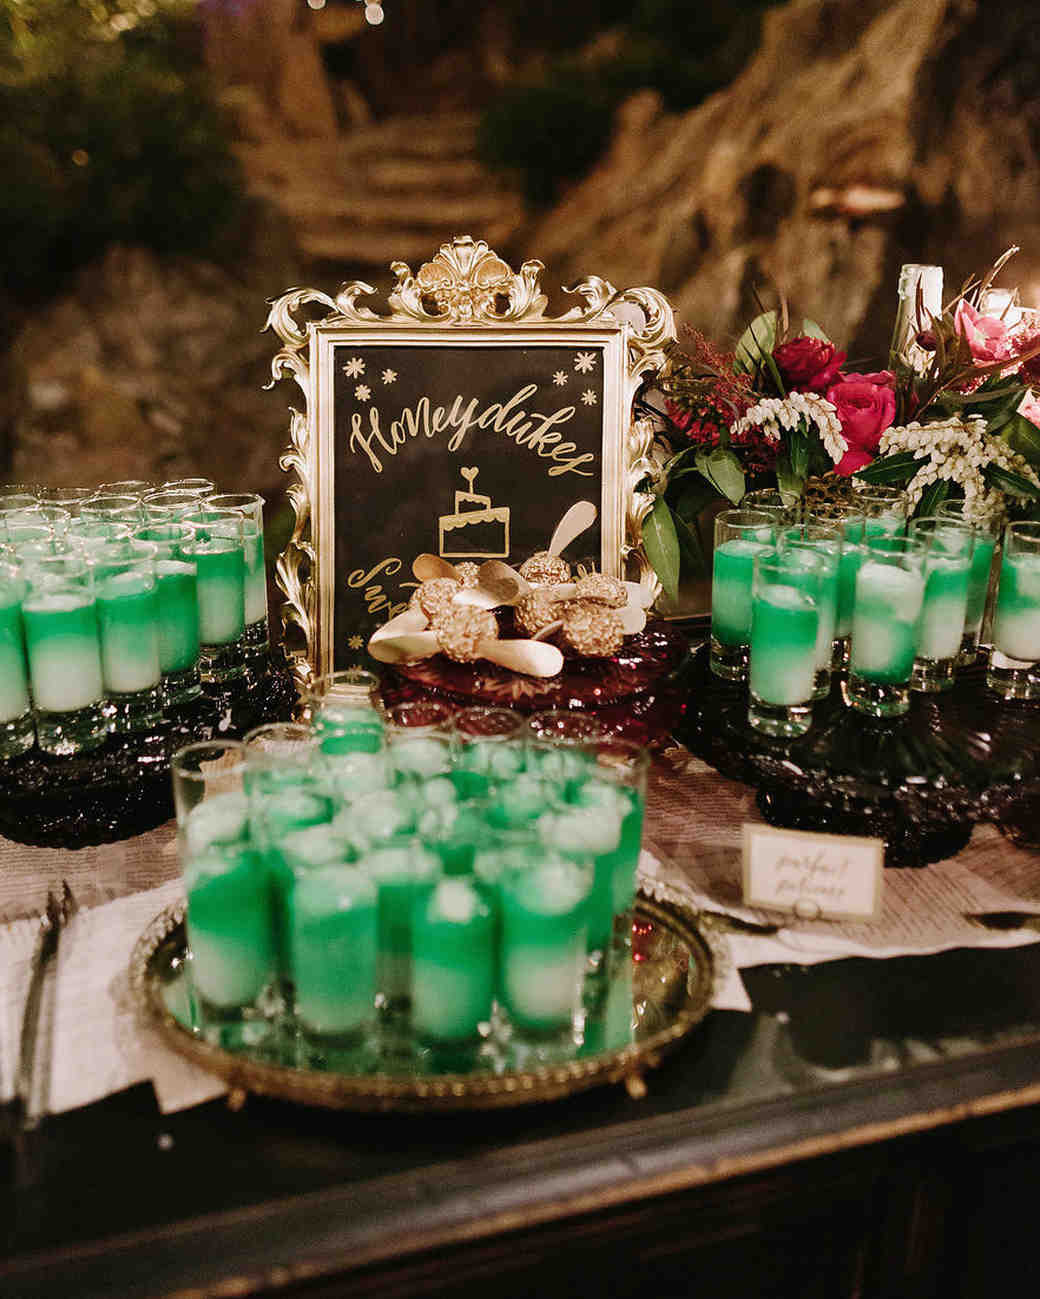 Harry Potter Themed Wedding
 A Moody Magical "Harry Potter" Themed Wedding